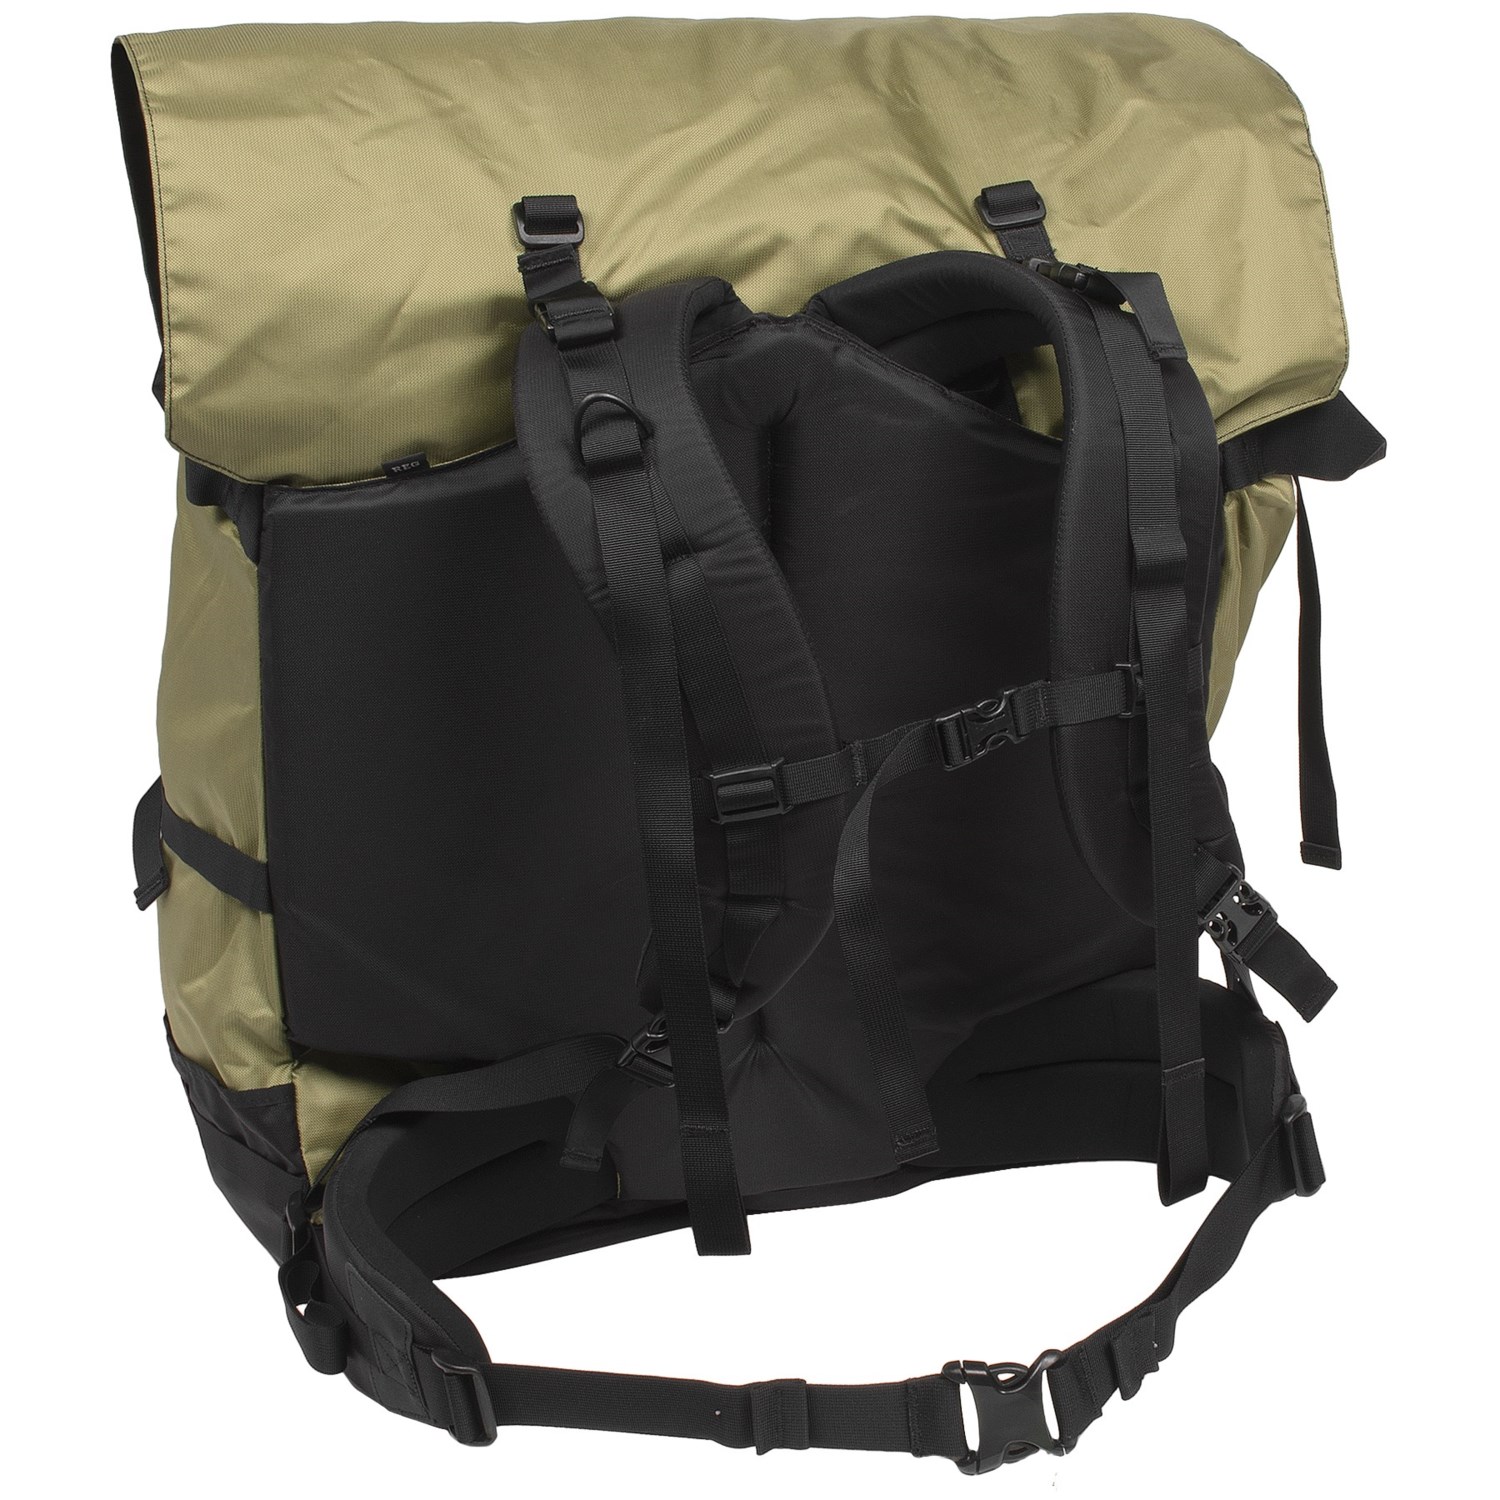 Granite Gear Quetico Expedition Portage Pack - Short 6816J - Save 58%